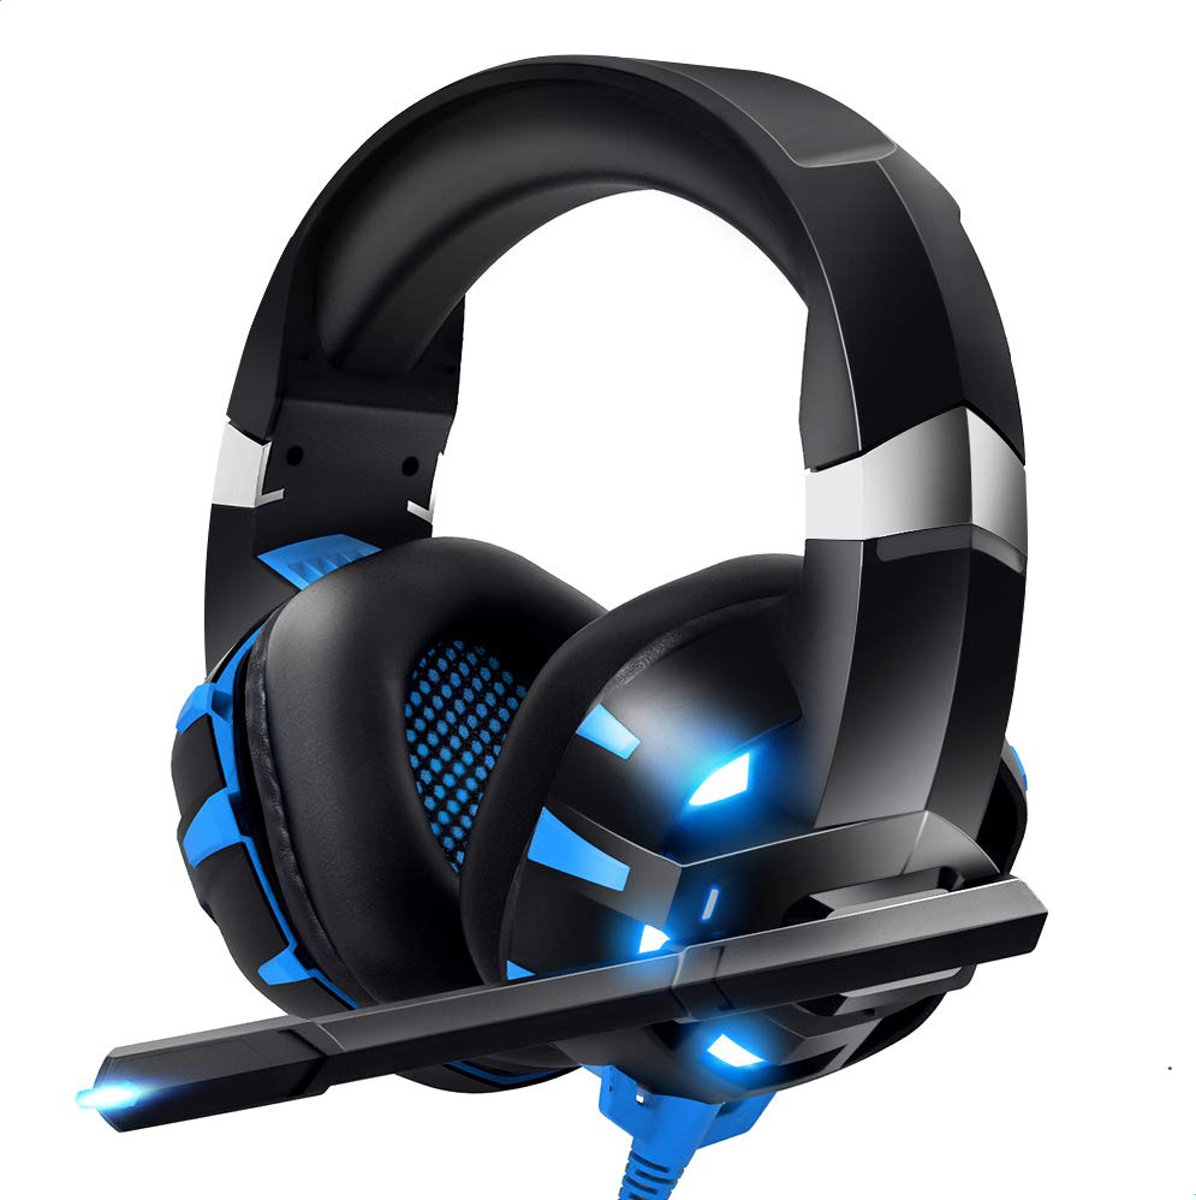 Gaming Headset Blauw | Koptelefoon |7.1 Surround Sound | Microfoon | Noise Canceling | PC, PS4, Xbox One